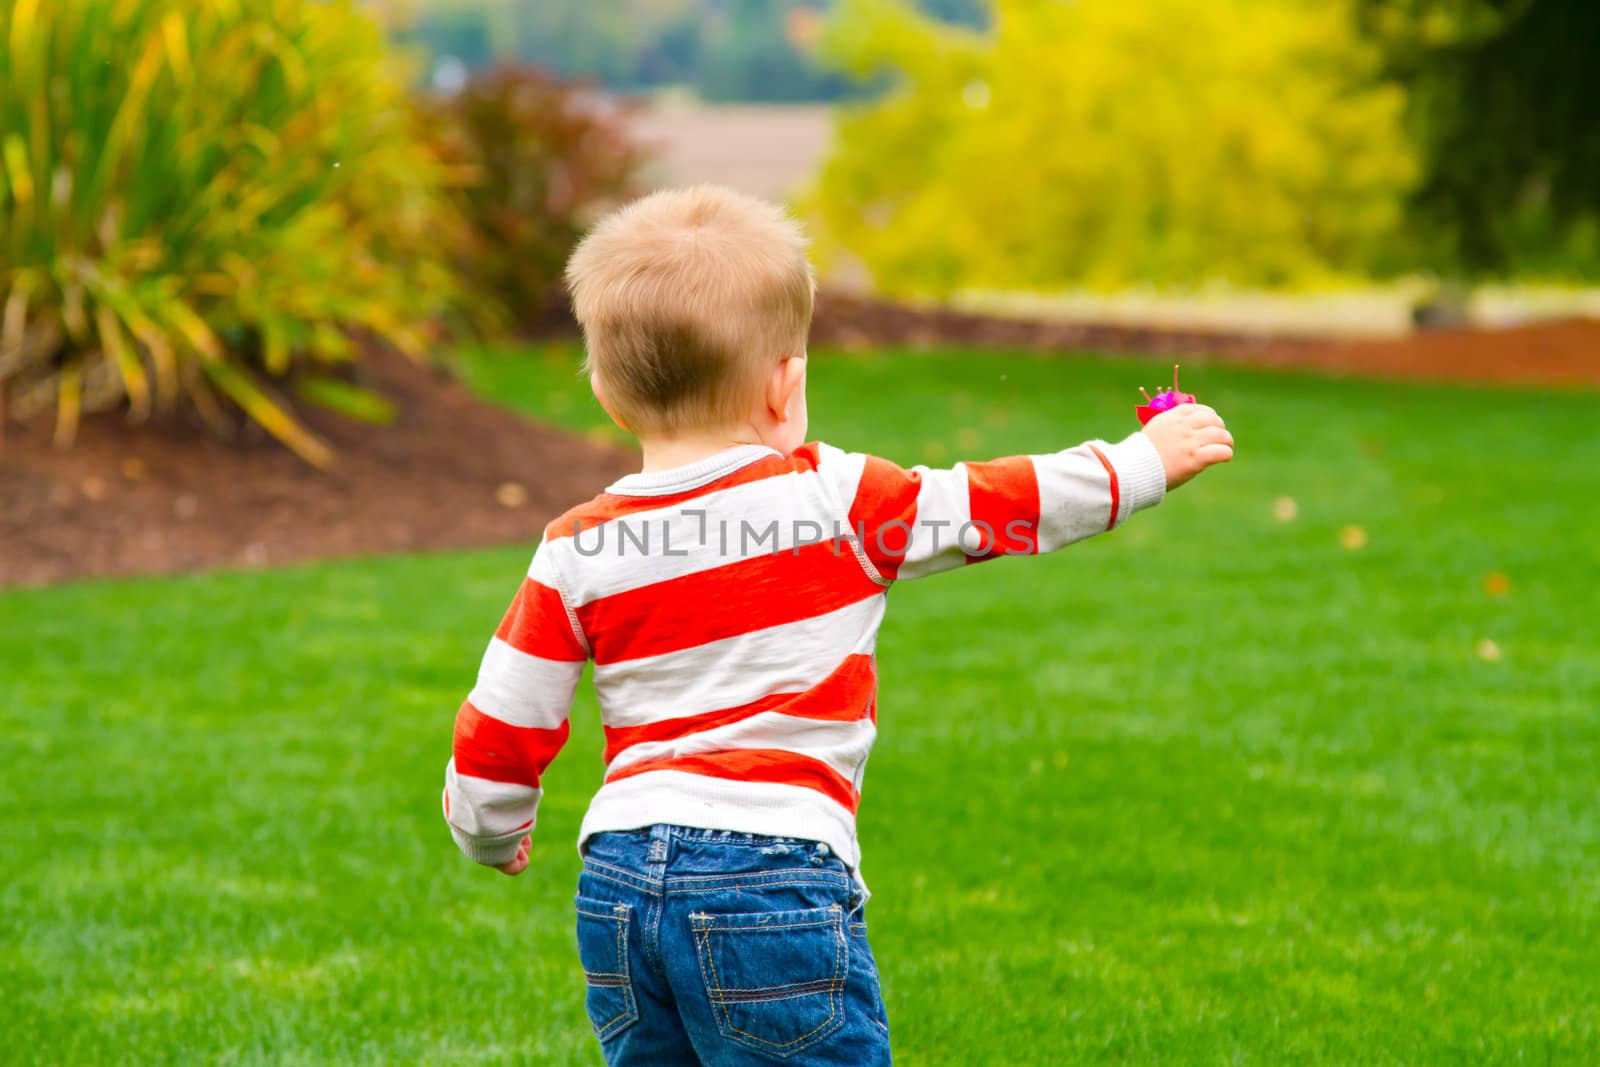 A portrait of a young boy playing outdoors wearing a red and white striped shirt.